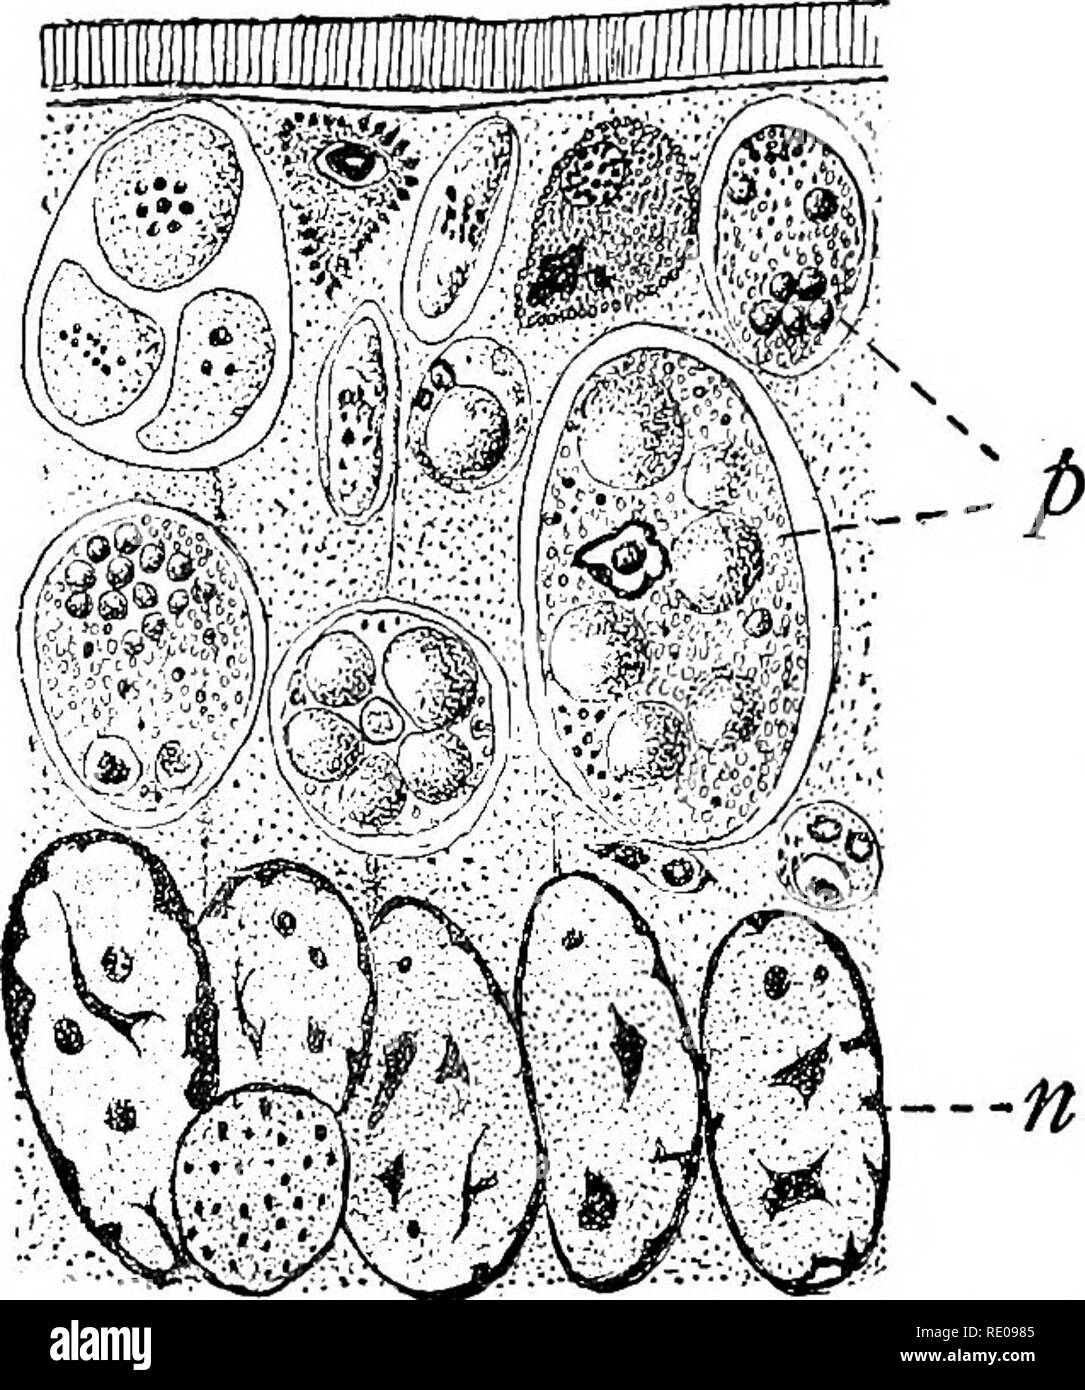 . The Protozoa. Protozoa. 142 THE PROTOZOA bore into the epithelial cells, where they grow (Fig. yy). All forms, apparently, begin life as intra-cellular parasites, where, at first, they do little harm, but as they grow by the absorption of fluids contained within their cell-hosts, the latter are improperly nourished and, unless the parasites leave them, they degenerate and die (Fig. 78). The duration of intra-cellular life varies in different kinds of Spo- rozoa: some are permanently intra-cellular {monophagms forms, so-called Cytosporid'.a,etc.); others are intra-cellular only in the young o Stock Photo